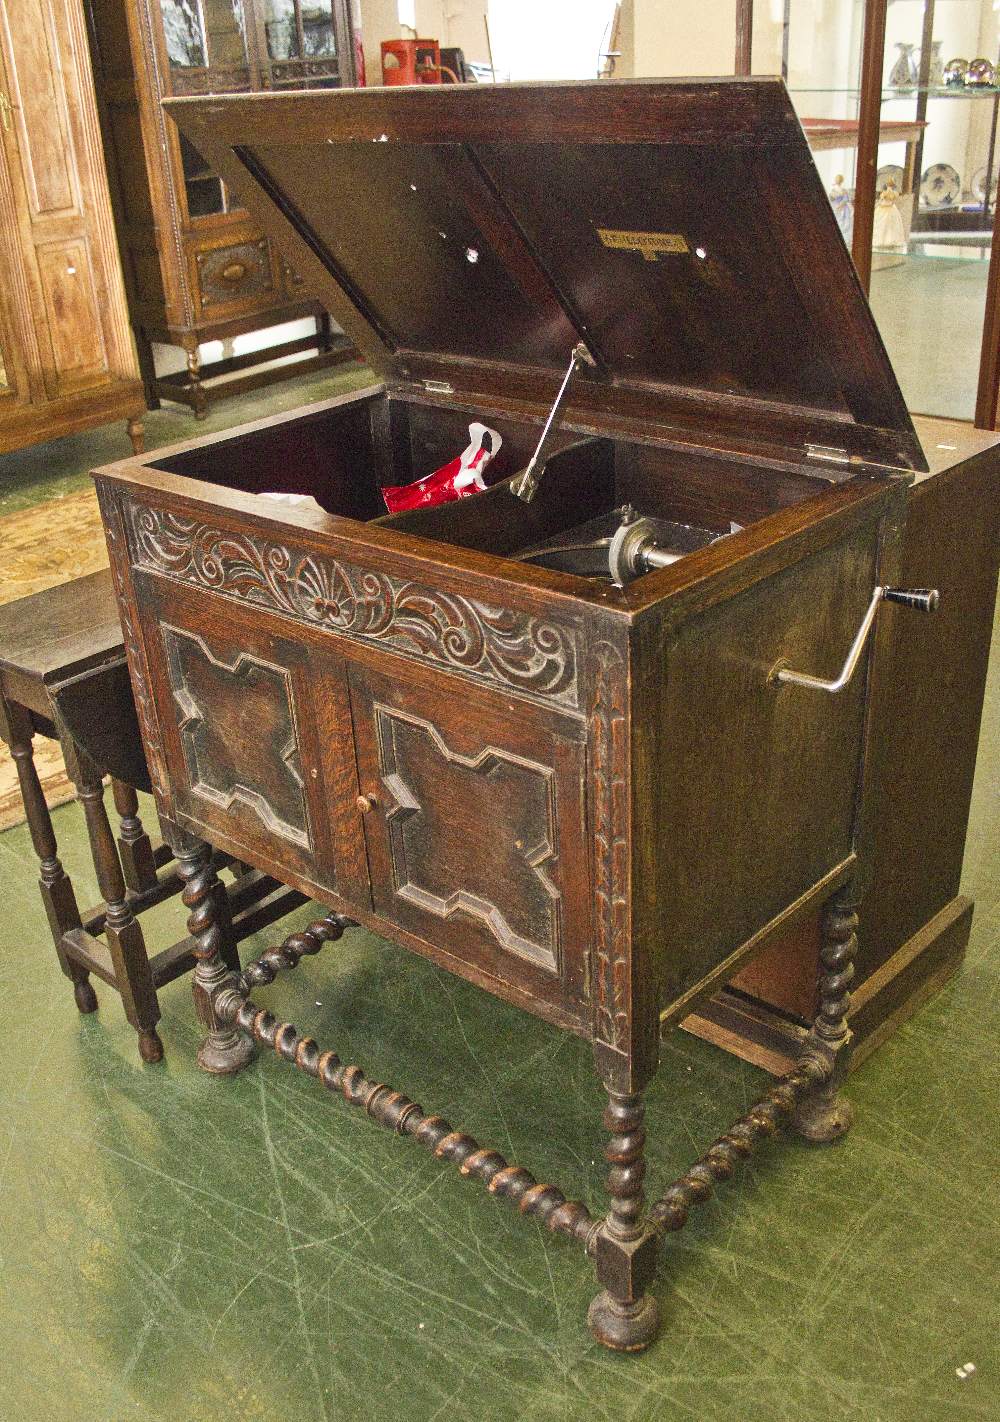 An oak cased windup gramophone 1930/40 and a quantity of 78 RPM records